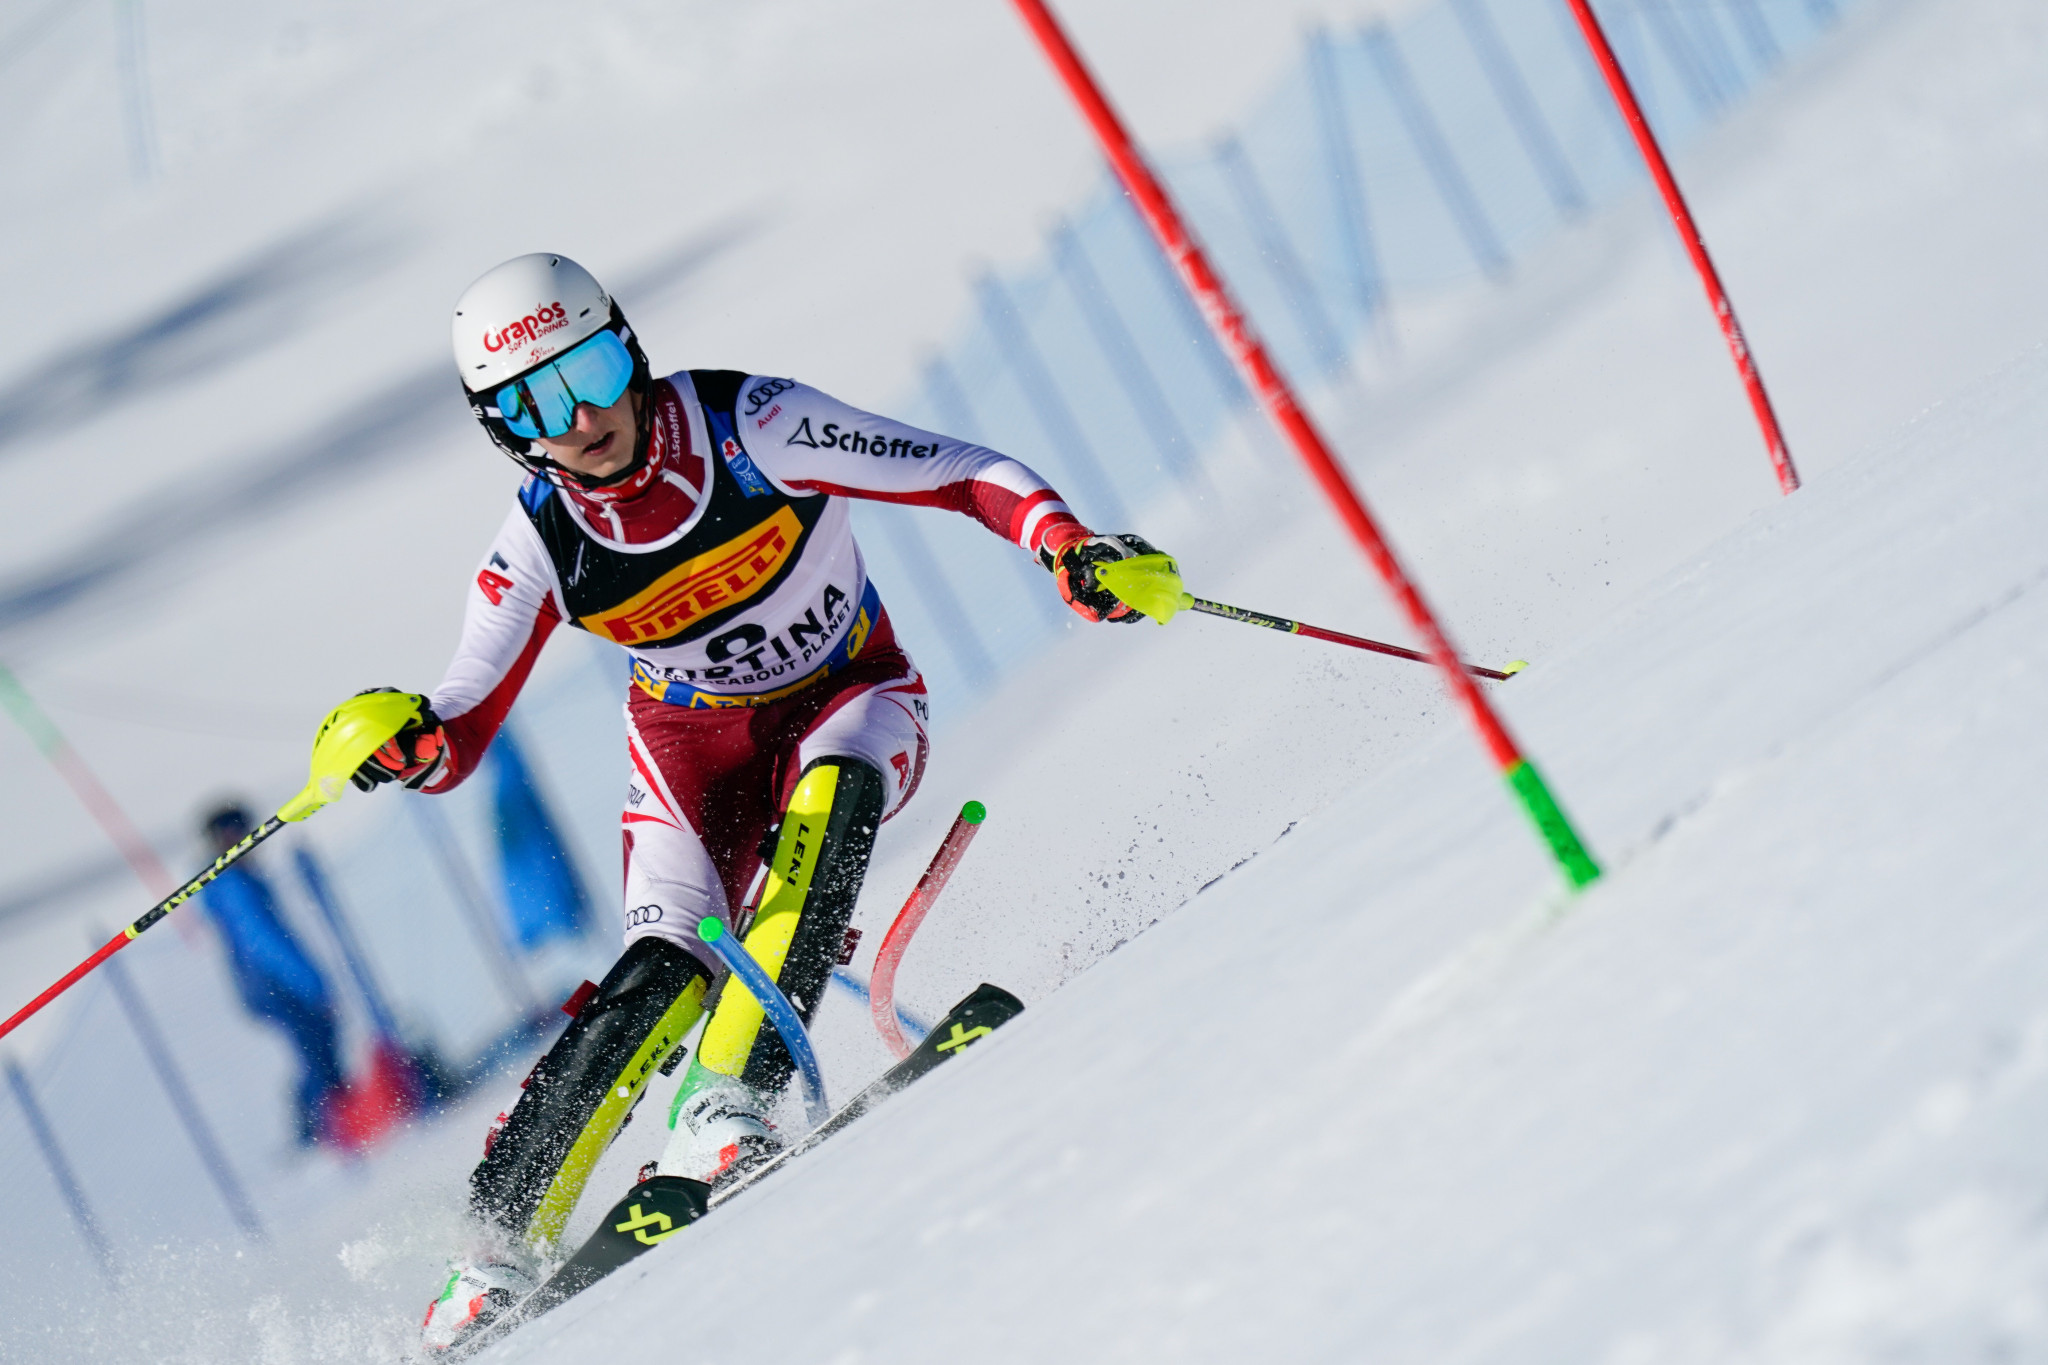 Adrian Pertl of Austria was surprised to finish third in the men's slalom ©Getty Images